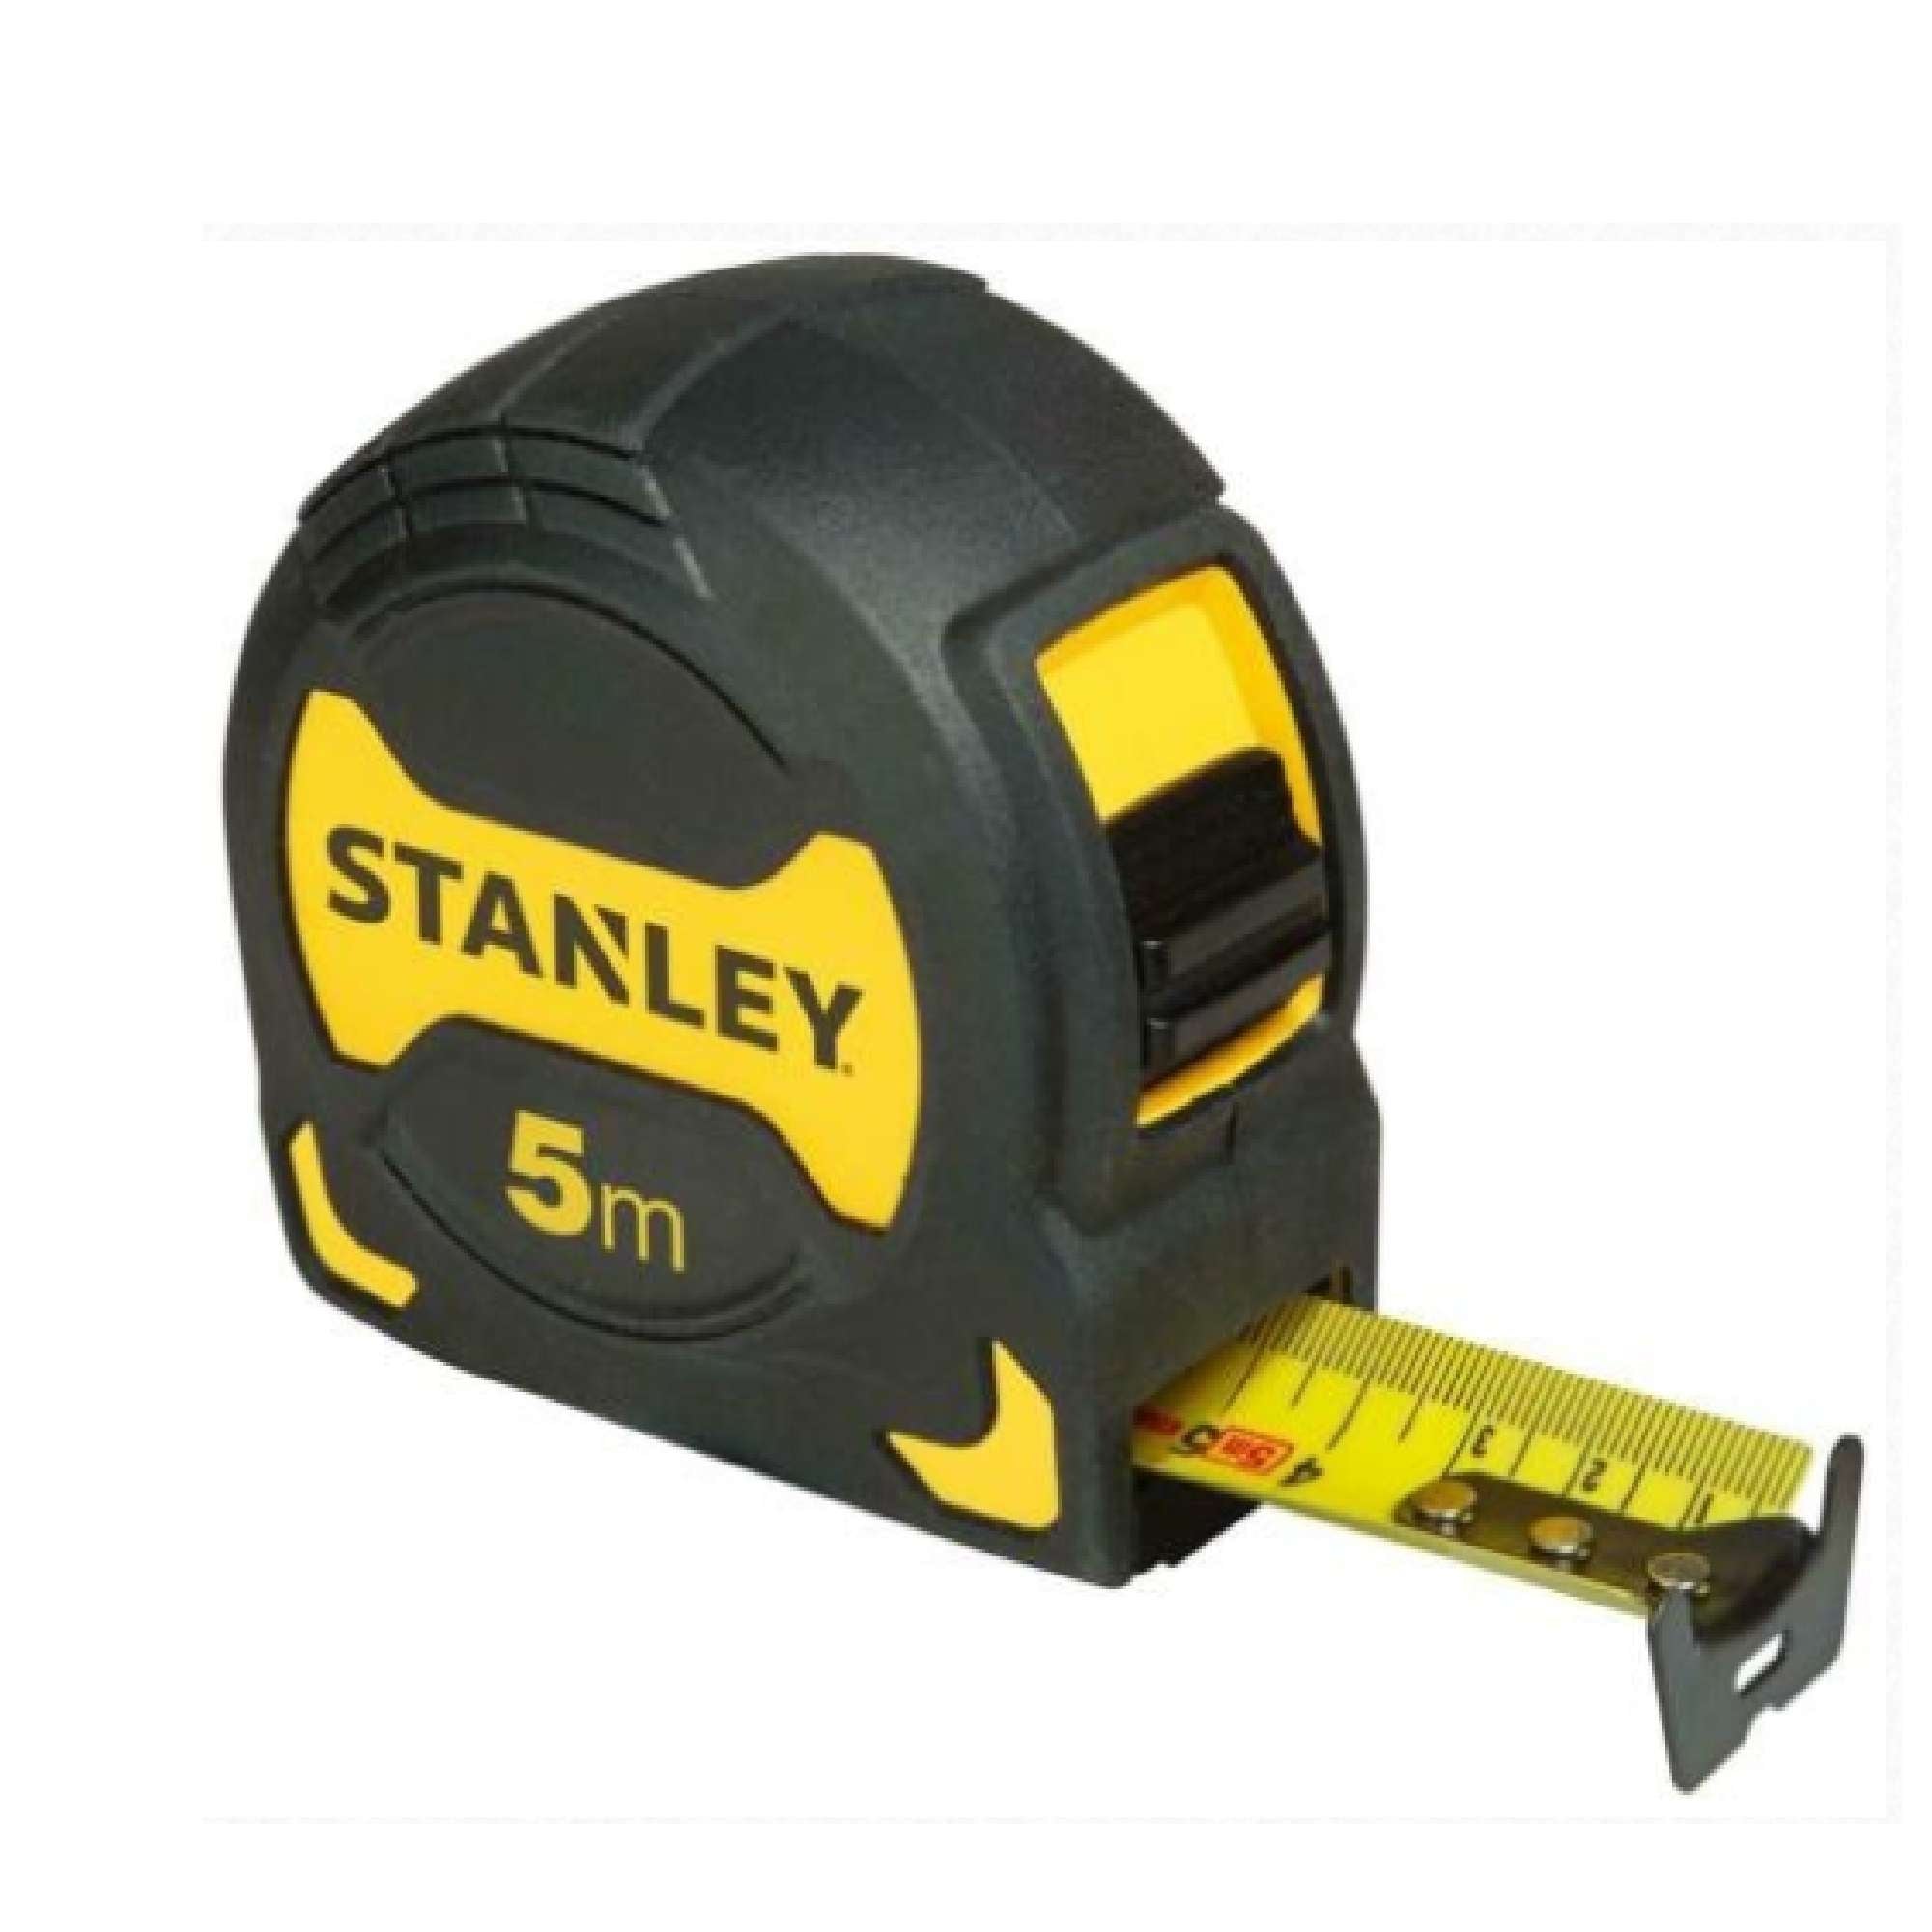 Flexometer with Grip surface that won't slip on slopes up to 42 Stanley